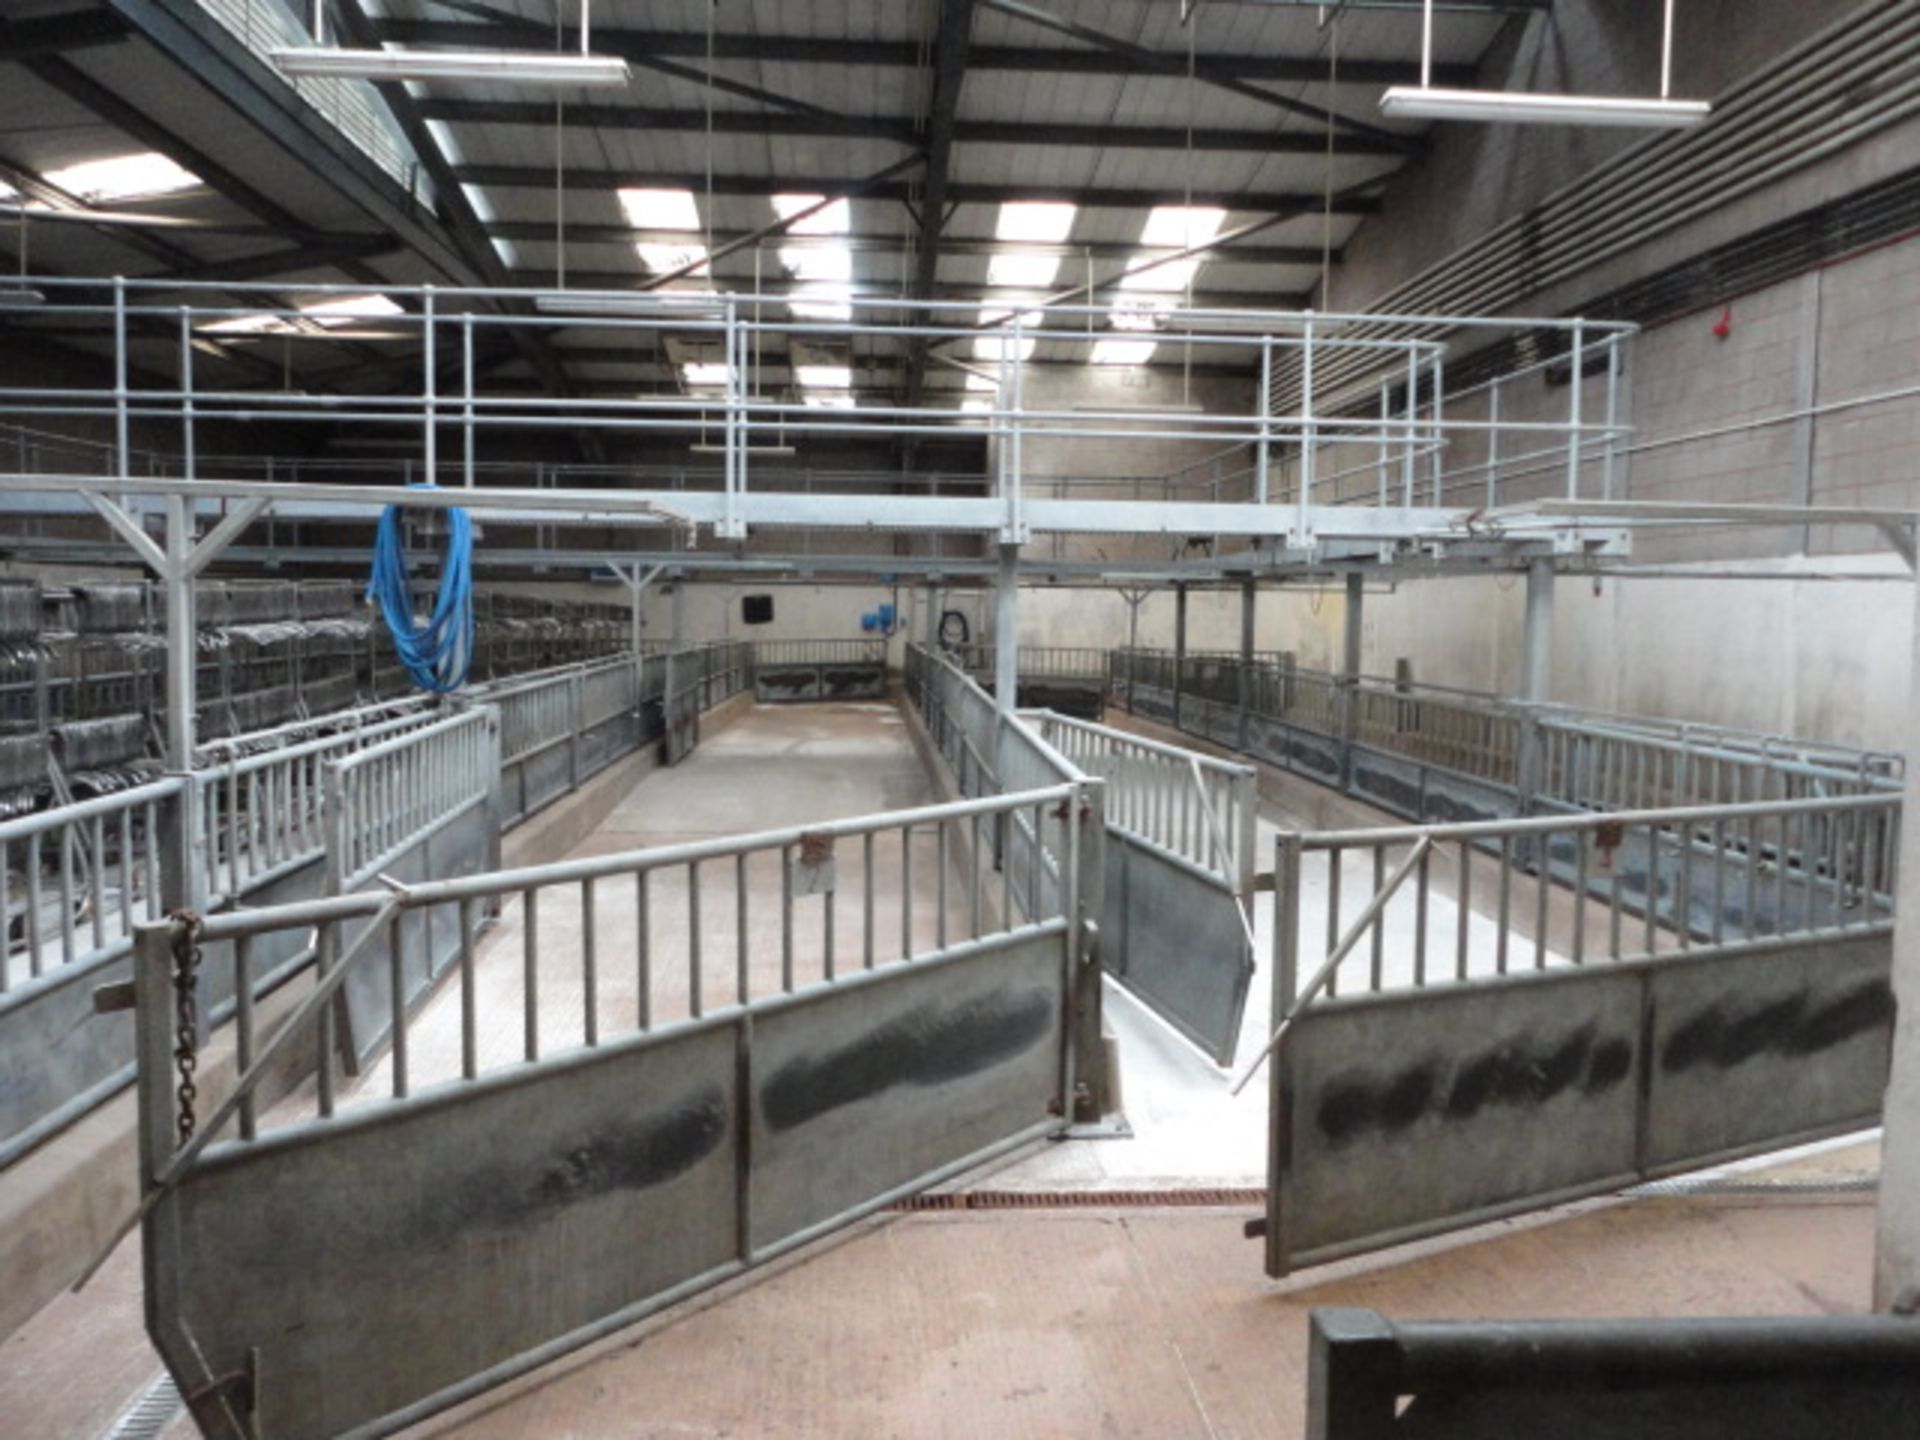 Lairage all steel work pens water sprays etc  The panels are 900mm x 2900mm 34 total, 6 900 x 650. - Image 3 of 7